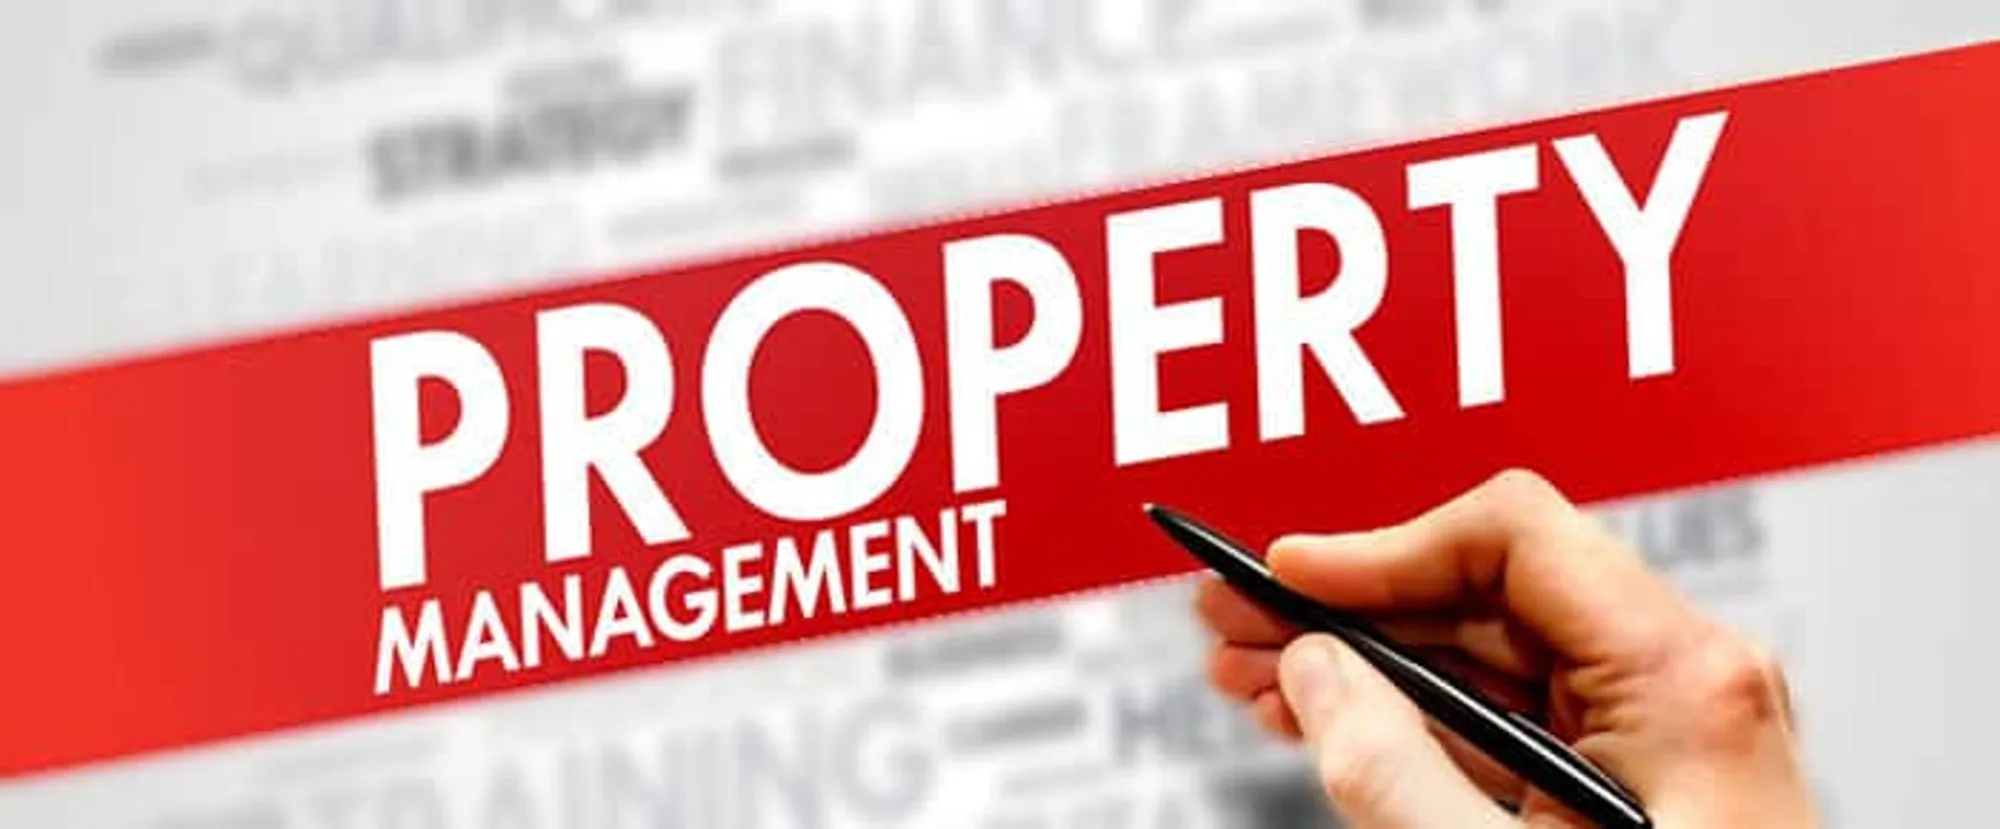 To Avoid Property Disputes- Learn Property Management